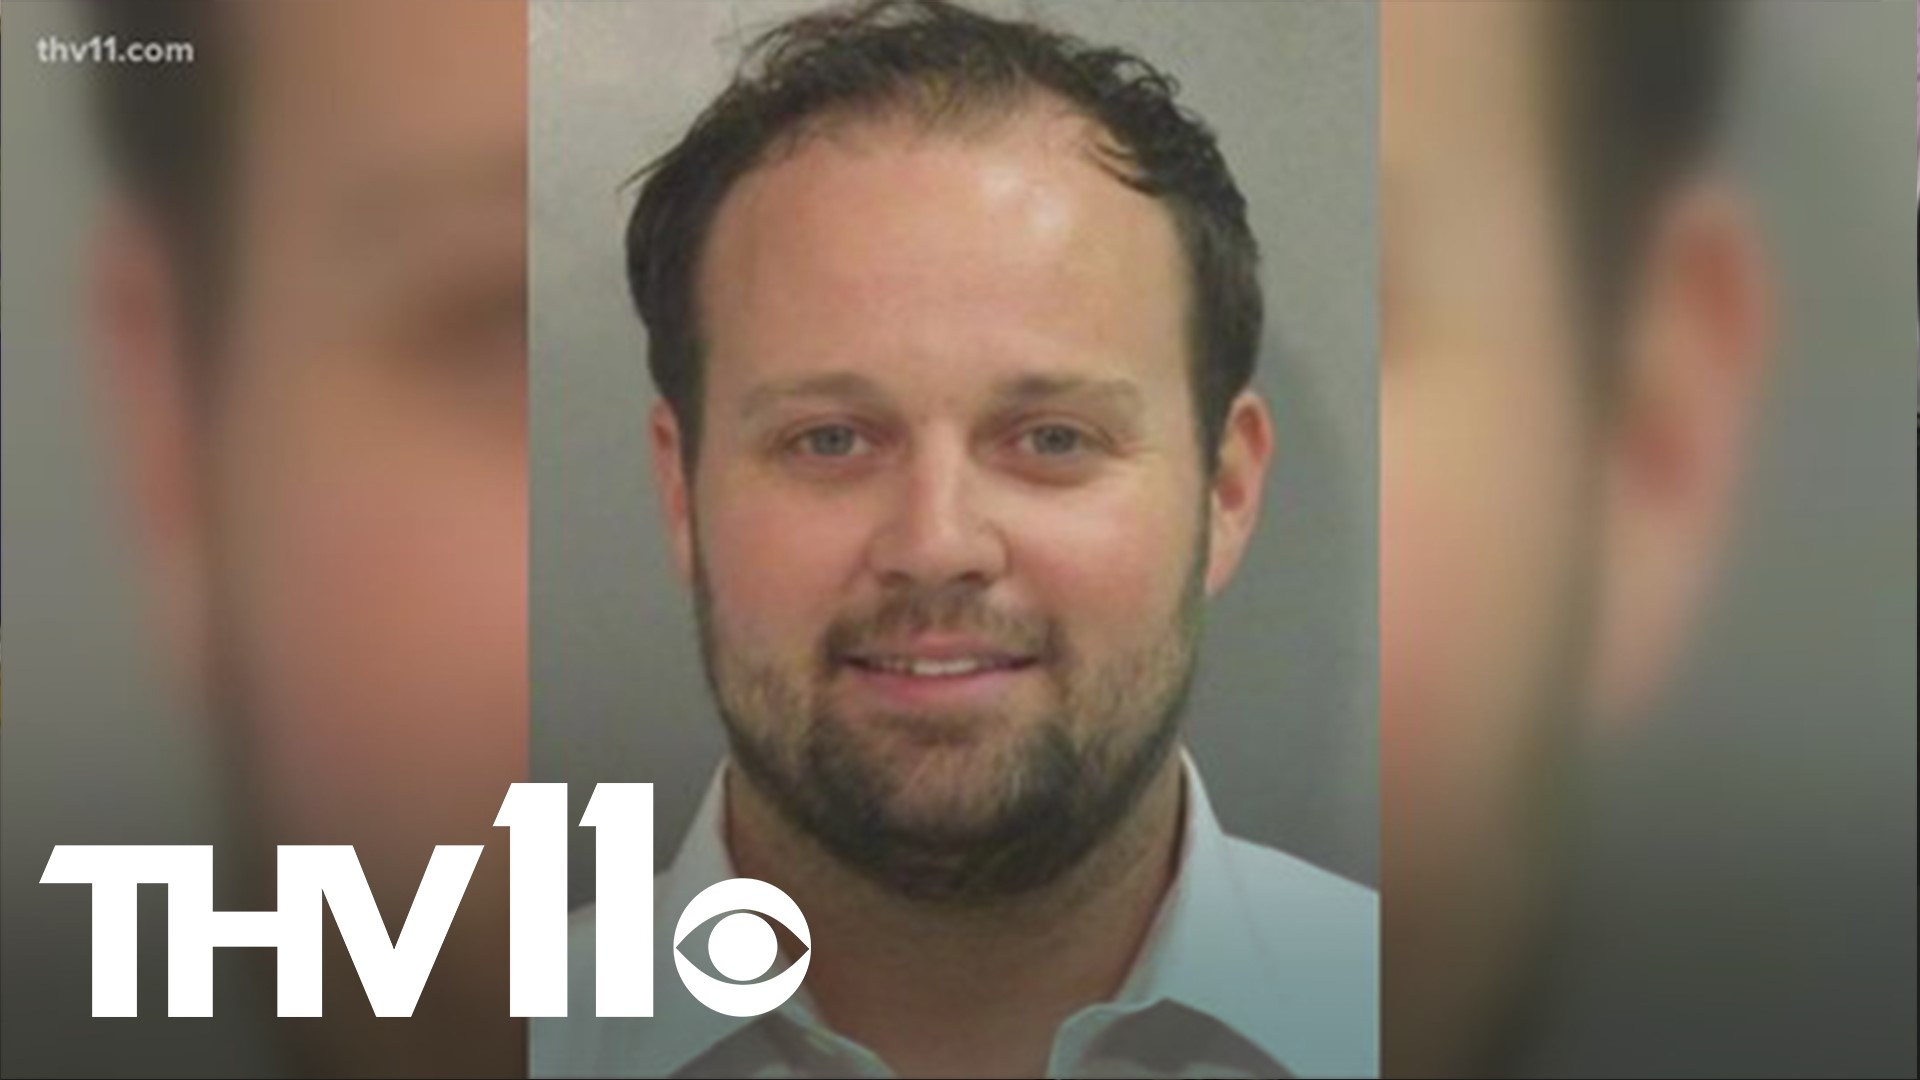 The jury reached a verdict this morning, finding former reality star Josh Duggar guilty on both charges of downloading and possessing child pornography.